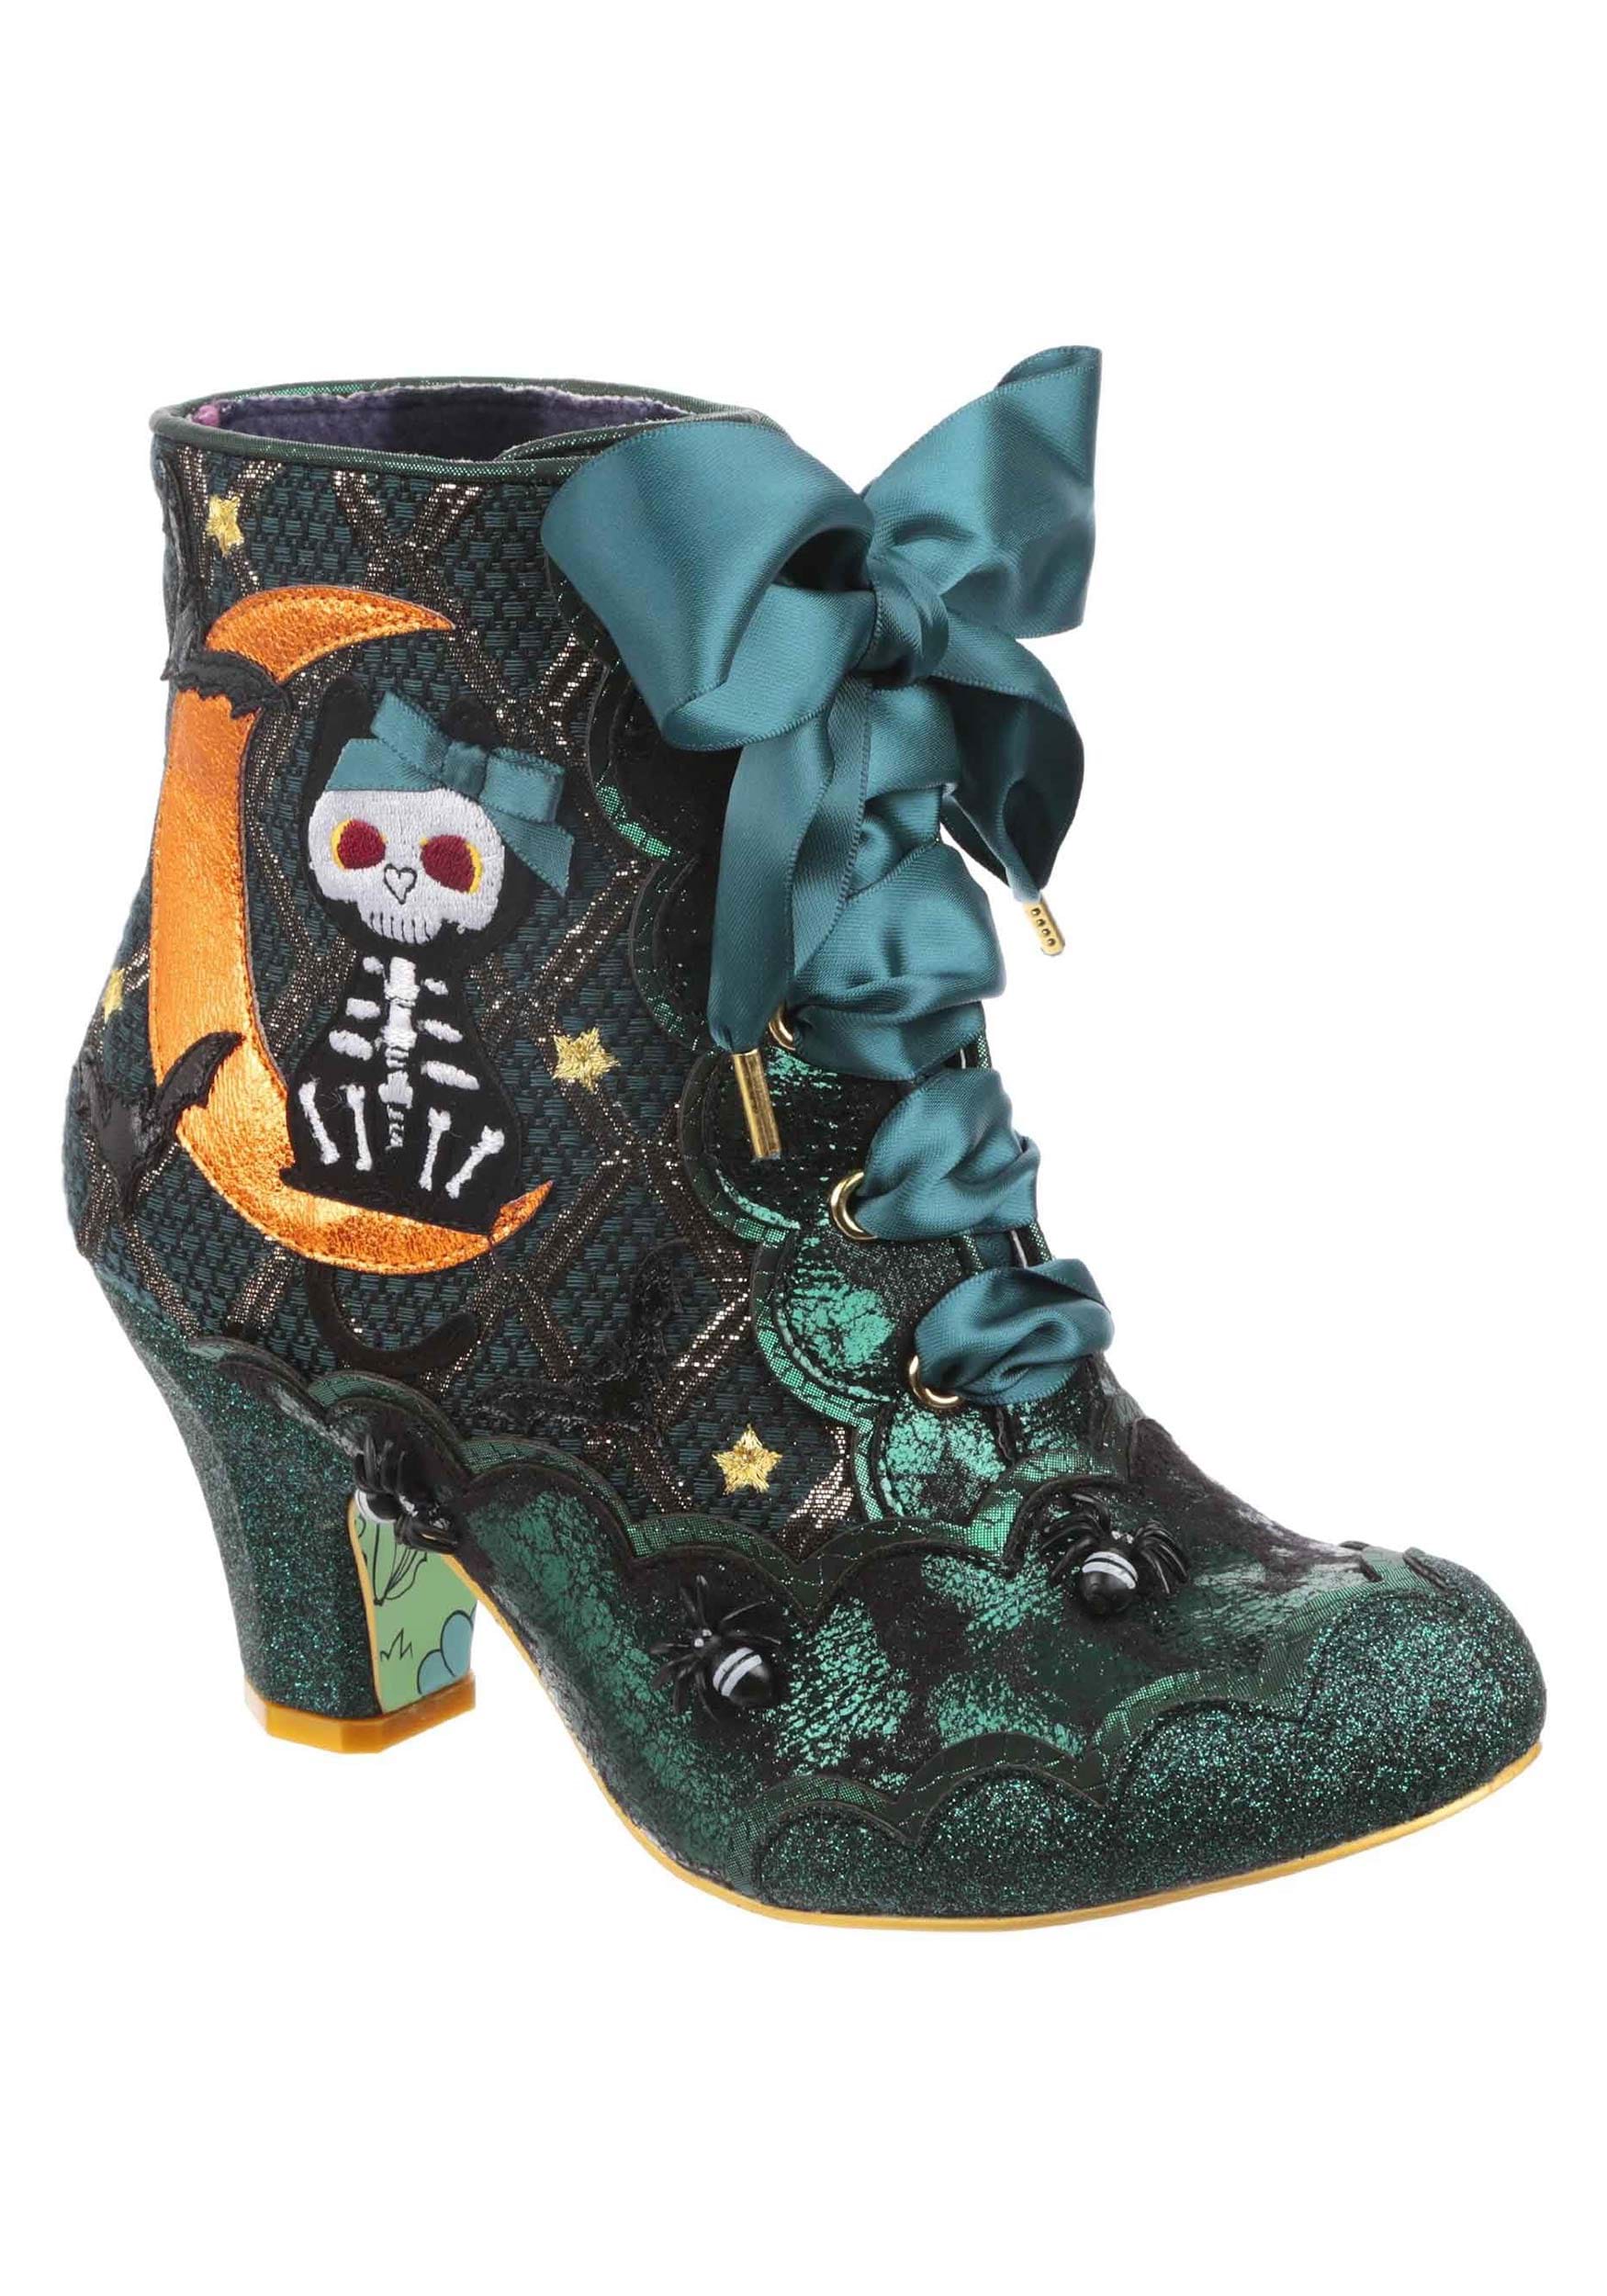 Image of Irregular Choice Kitty in the Moon Ankle Boot Heel ID IRR4405-17A-7.5